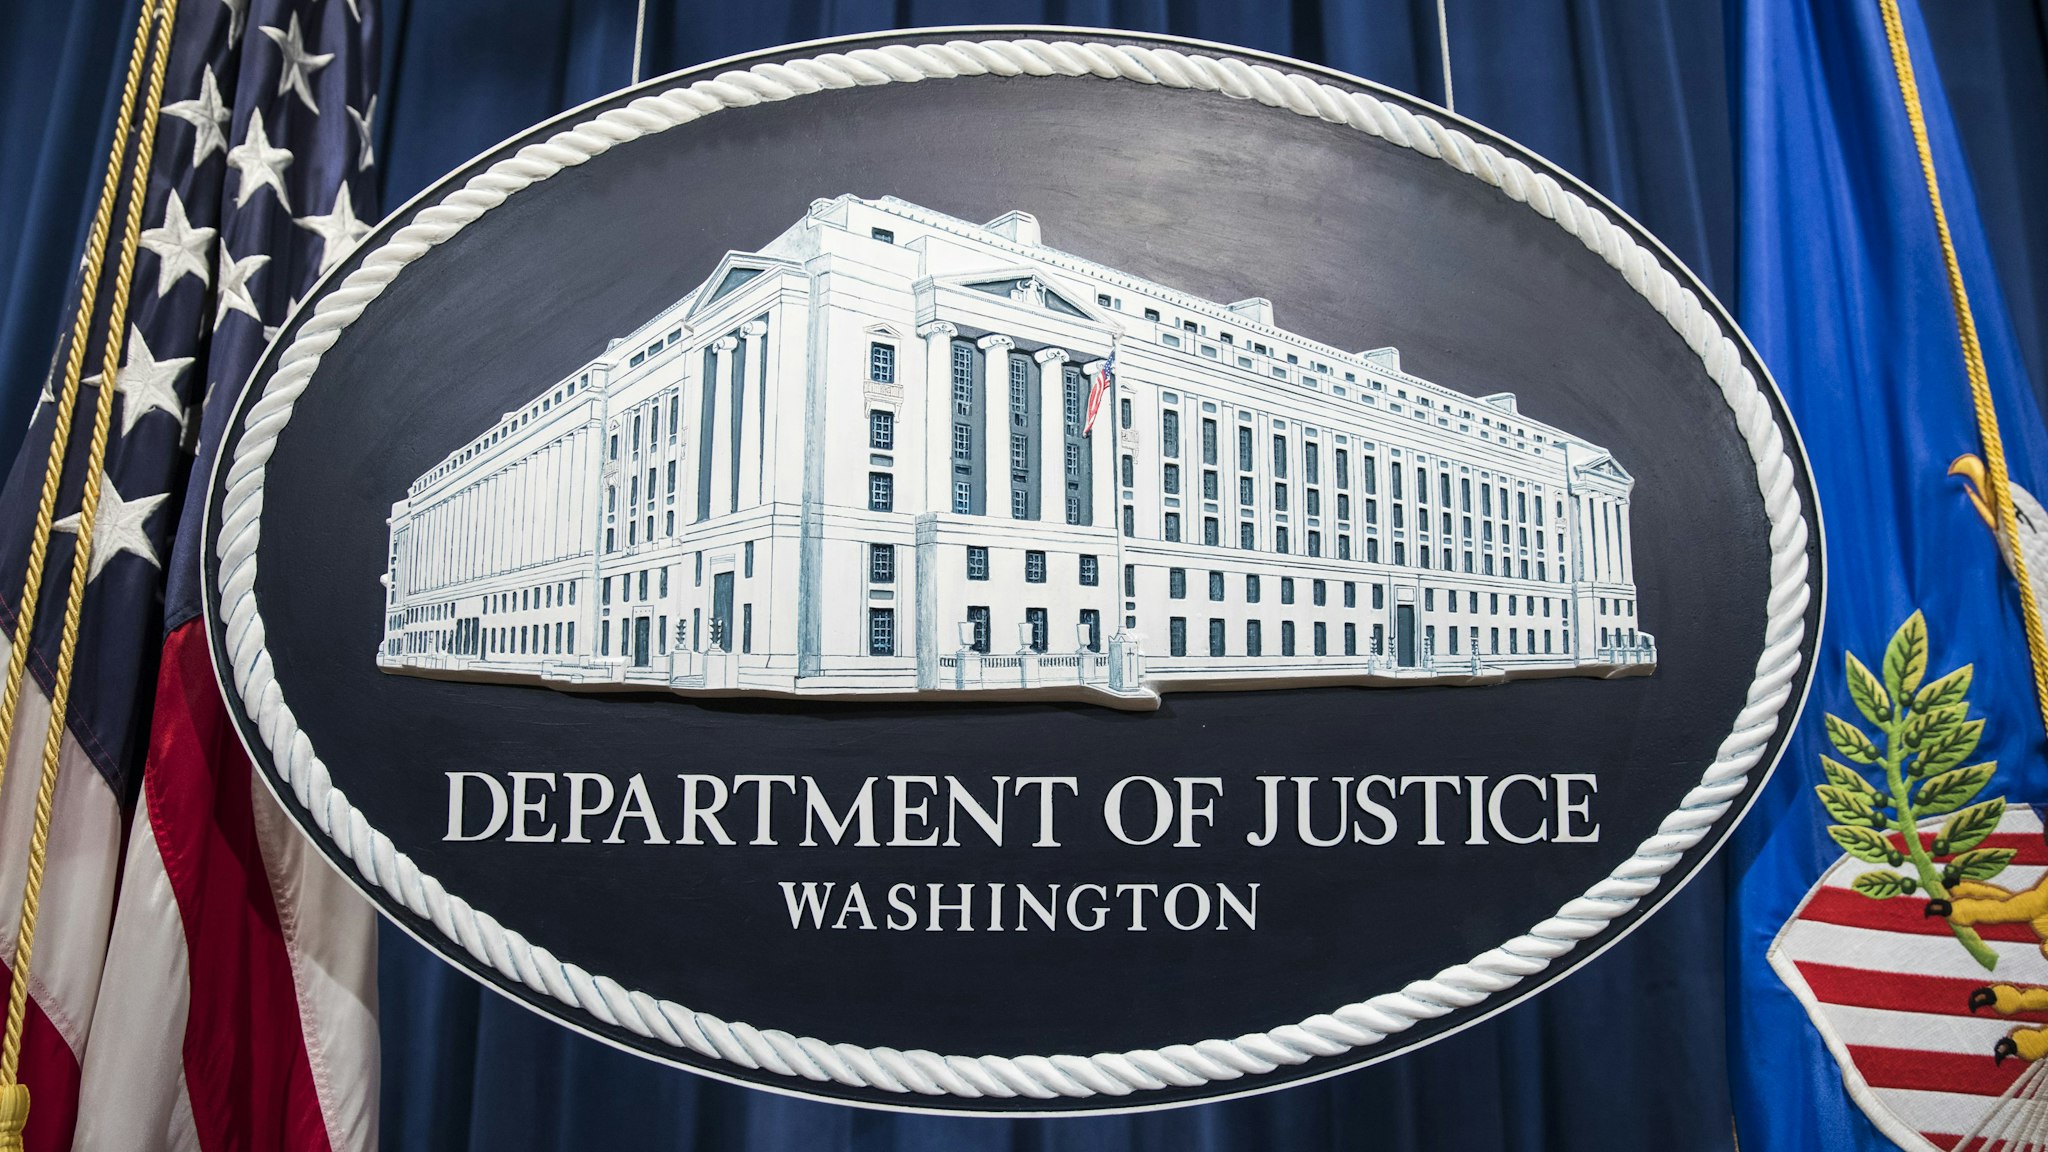 The Department of Justice logo hangs as the backdrop before a press conference held by Attorney General Jeff Sessions on leaks of classified material threatening national security in Washington, USA on August 4, 2017.